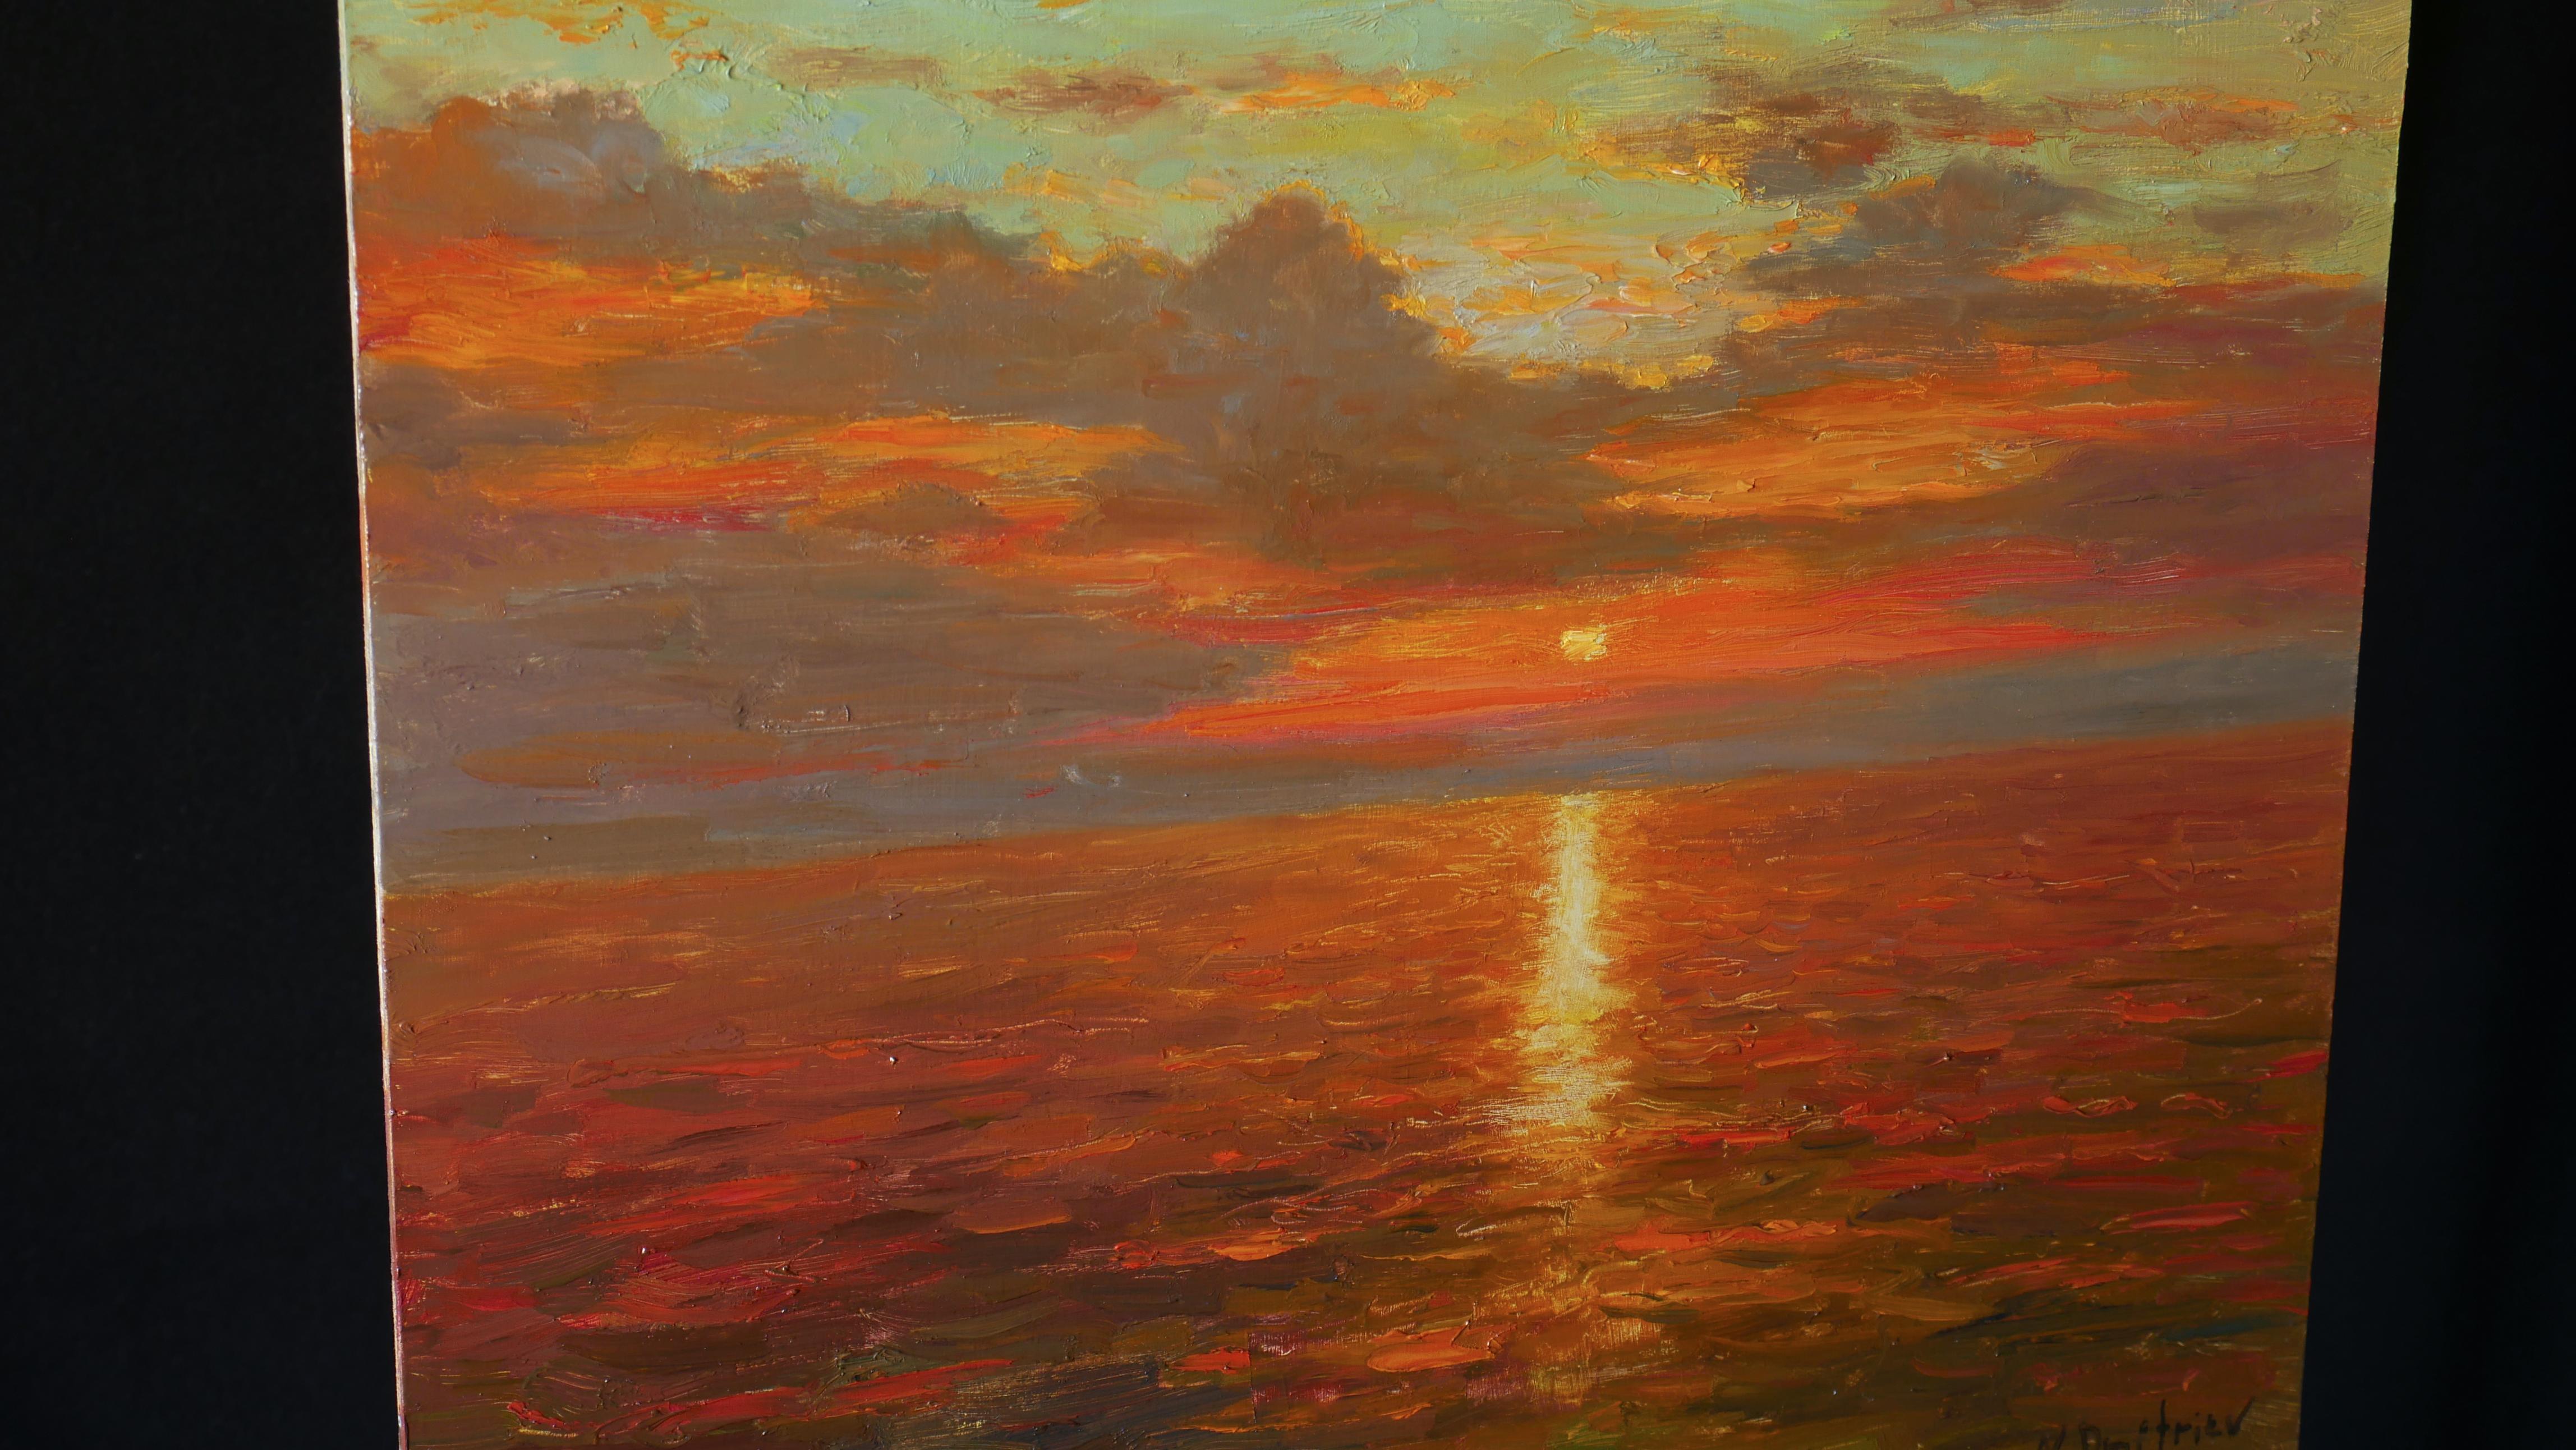 Bright Sunset Over The Sea - original oil painting  - Impressionist Painting by Nikolay Dmitriev